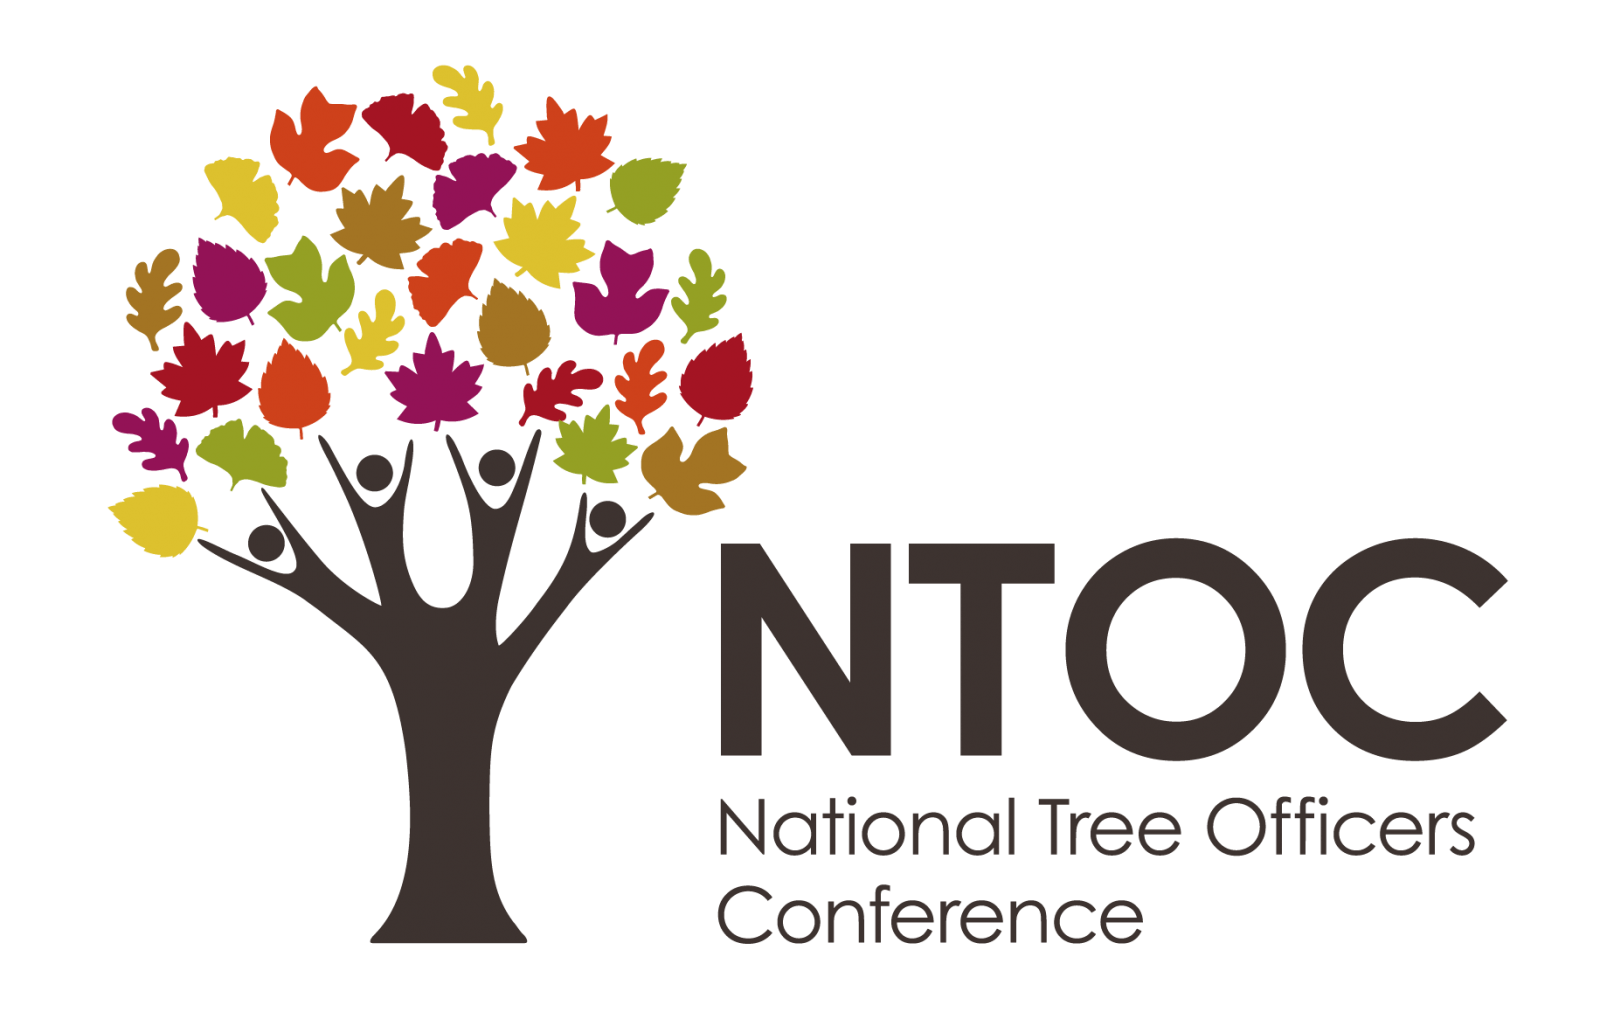 Vibrant Logo - National Tree Officers Conference launches vibrant logo